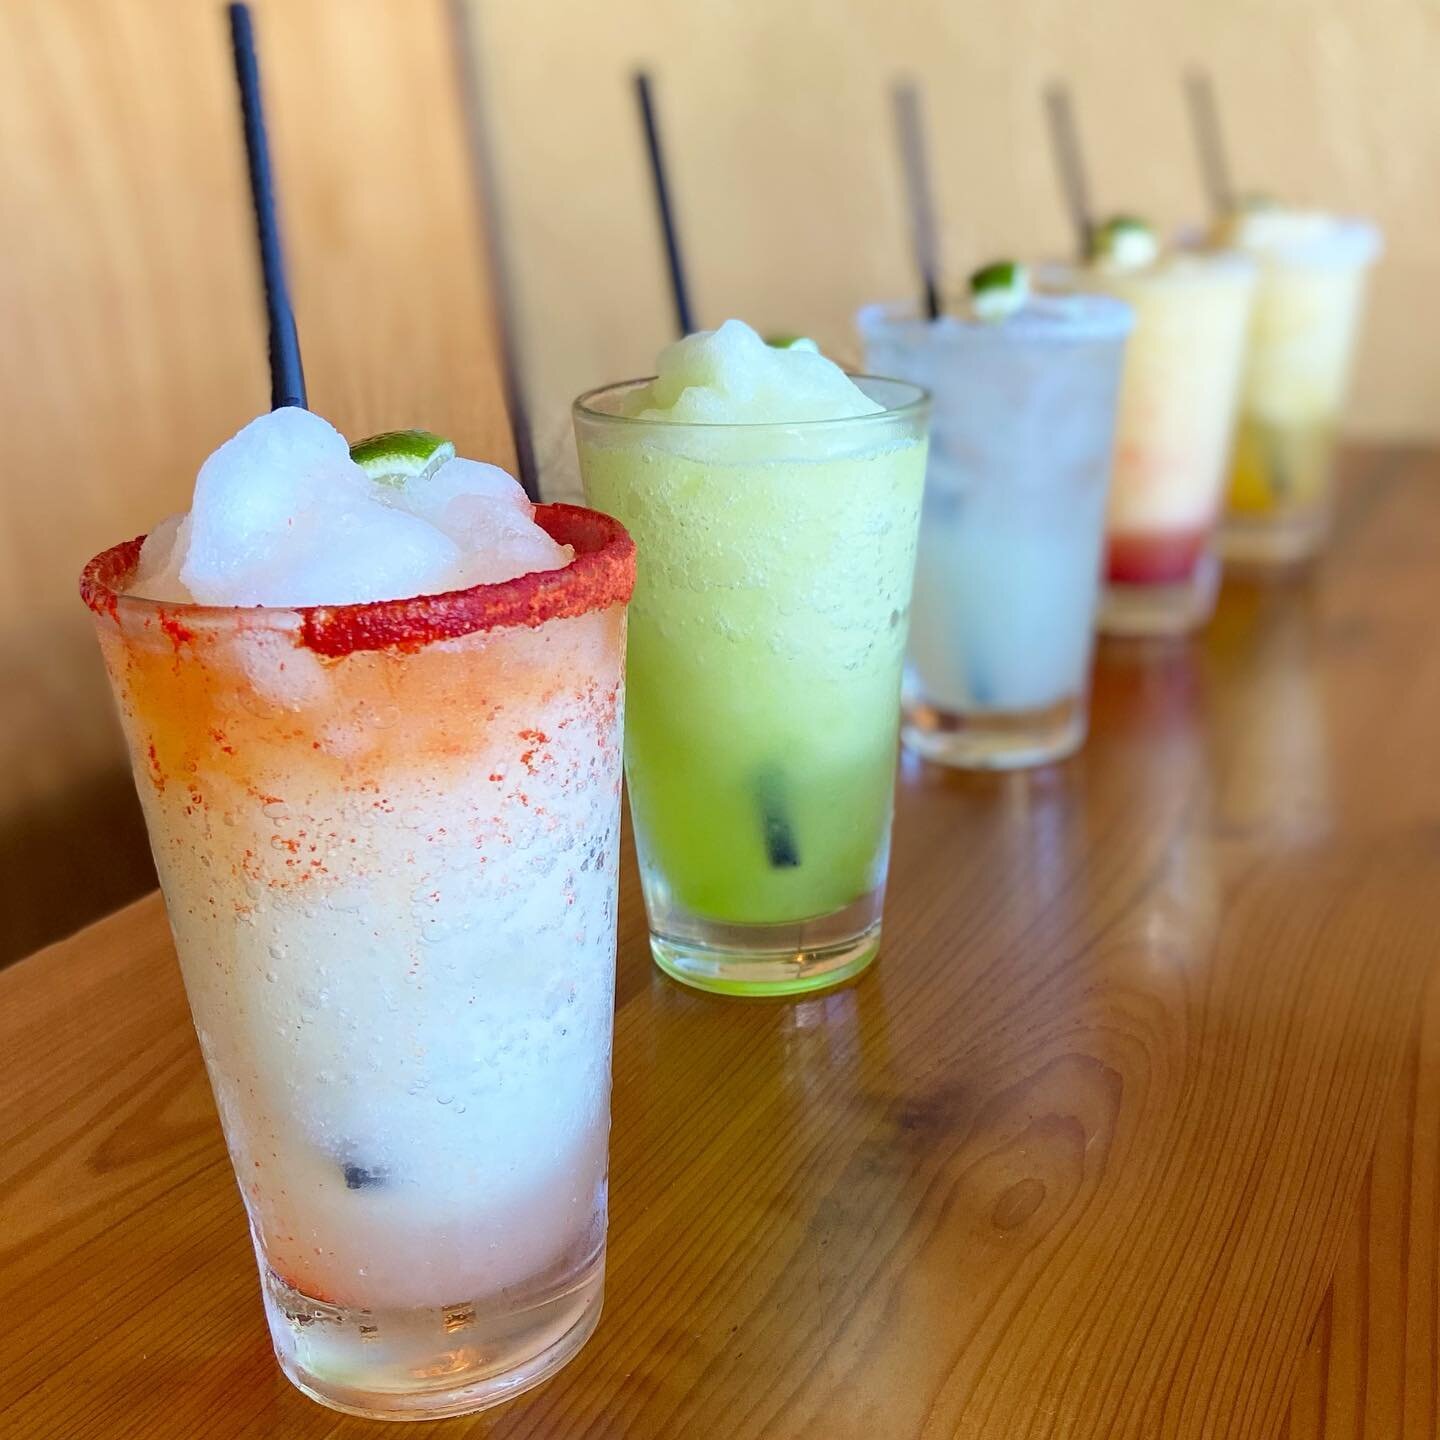 All lined up ready to celebrate National Margarita Day! Come join us 11am-9pm. 
.
.
.
.
.
#margarita #margaritas #nationalmargaritaday #celebration #cocktails #happyhour #makawao #maui #upcounrtymaui #upcountry